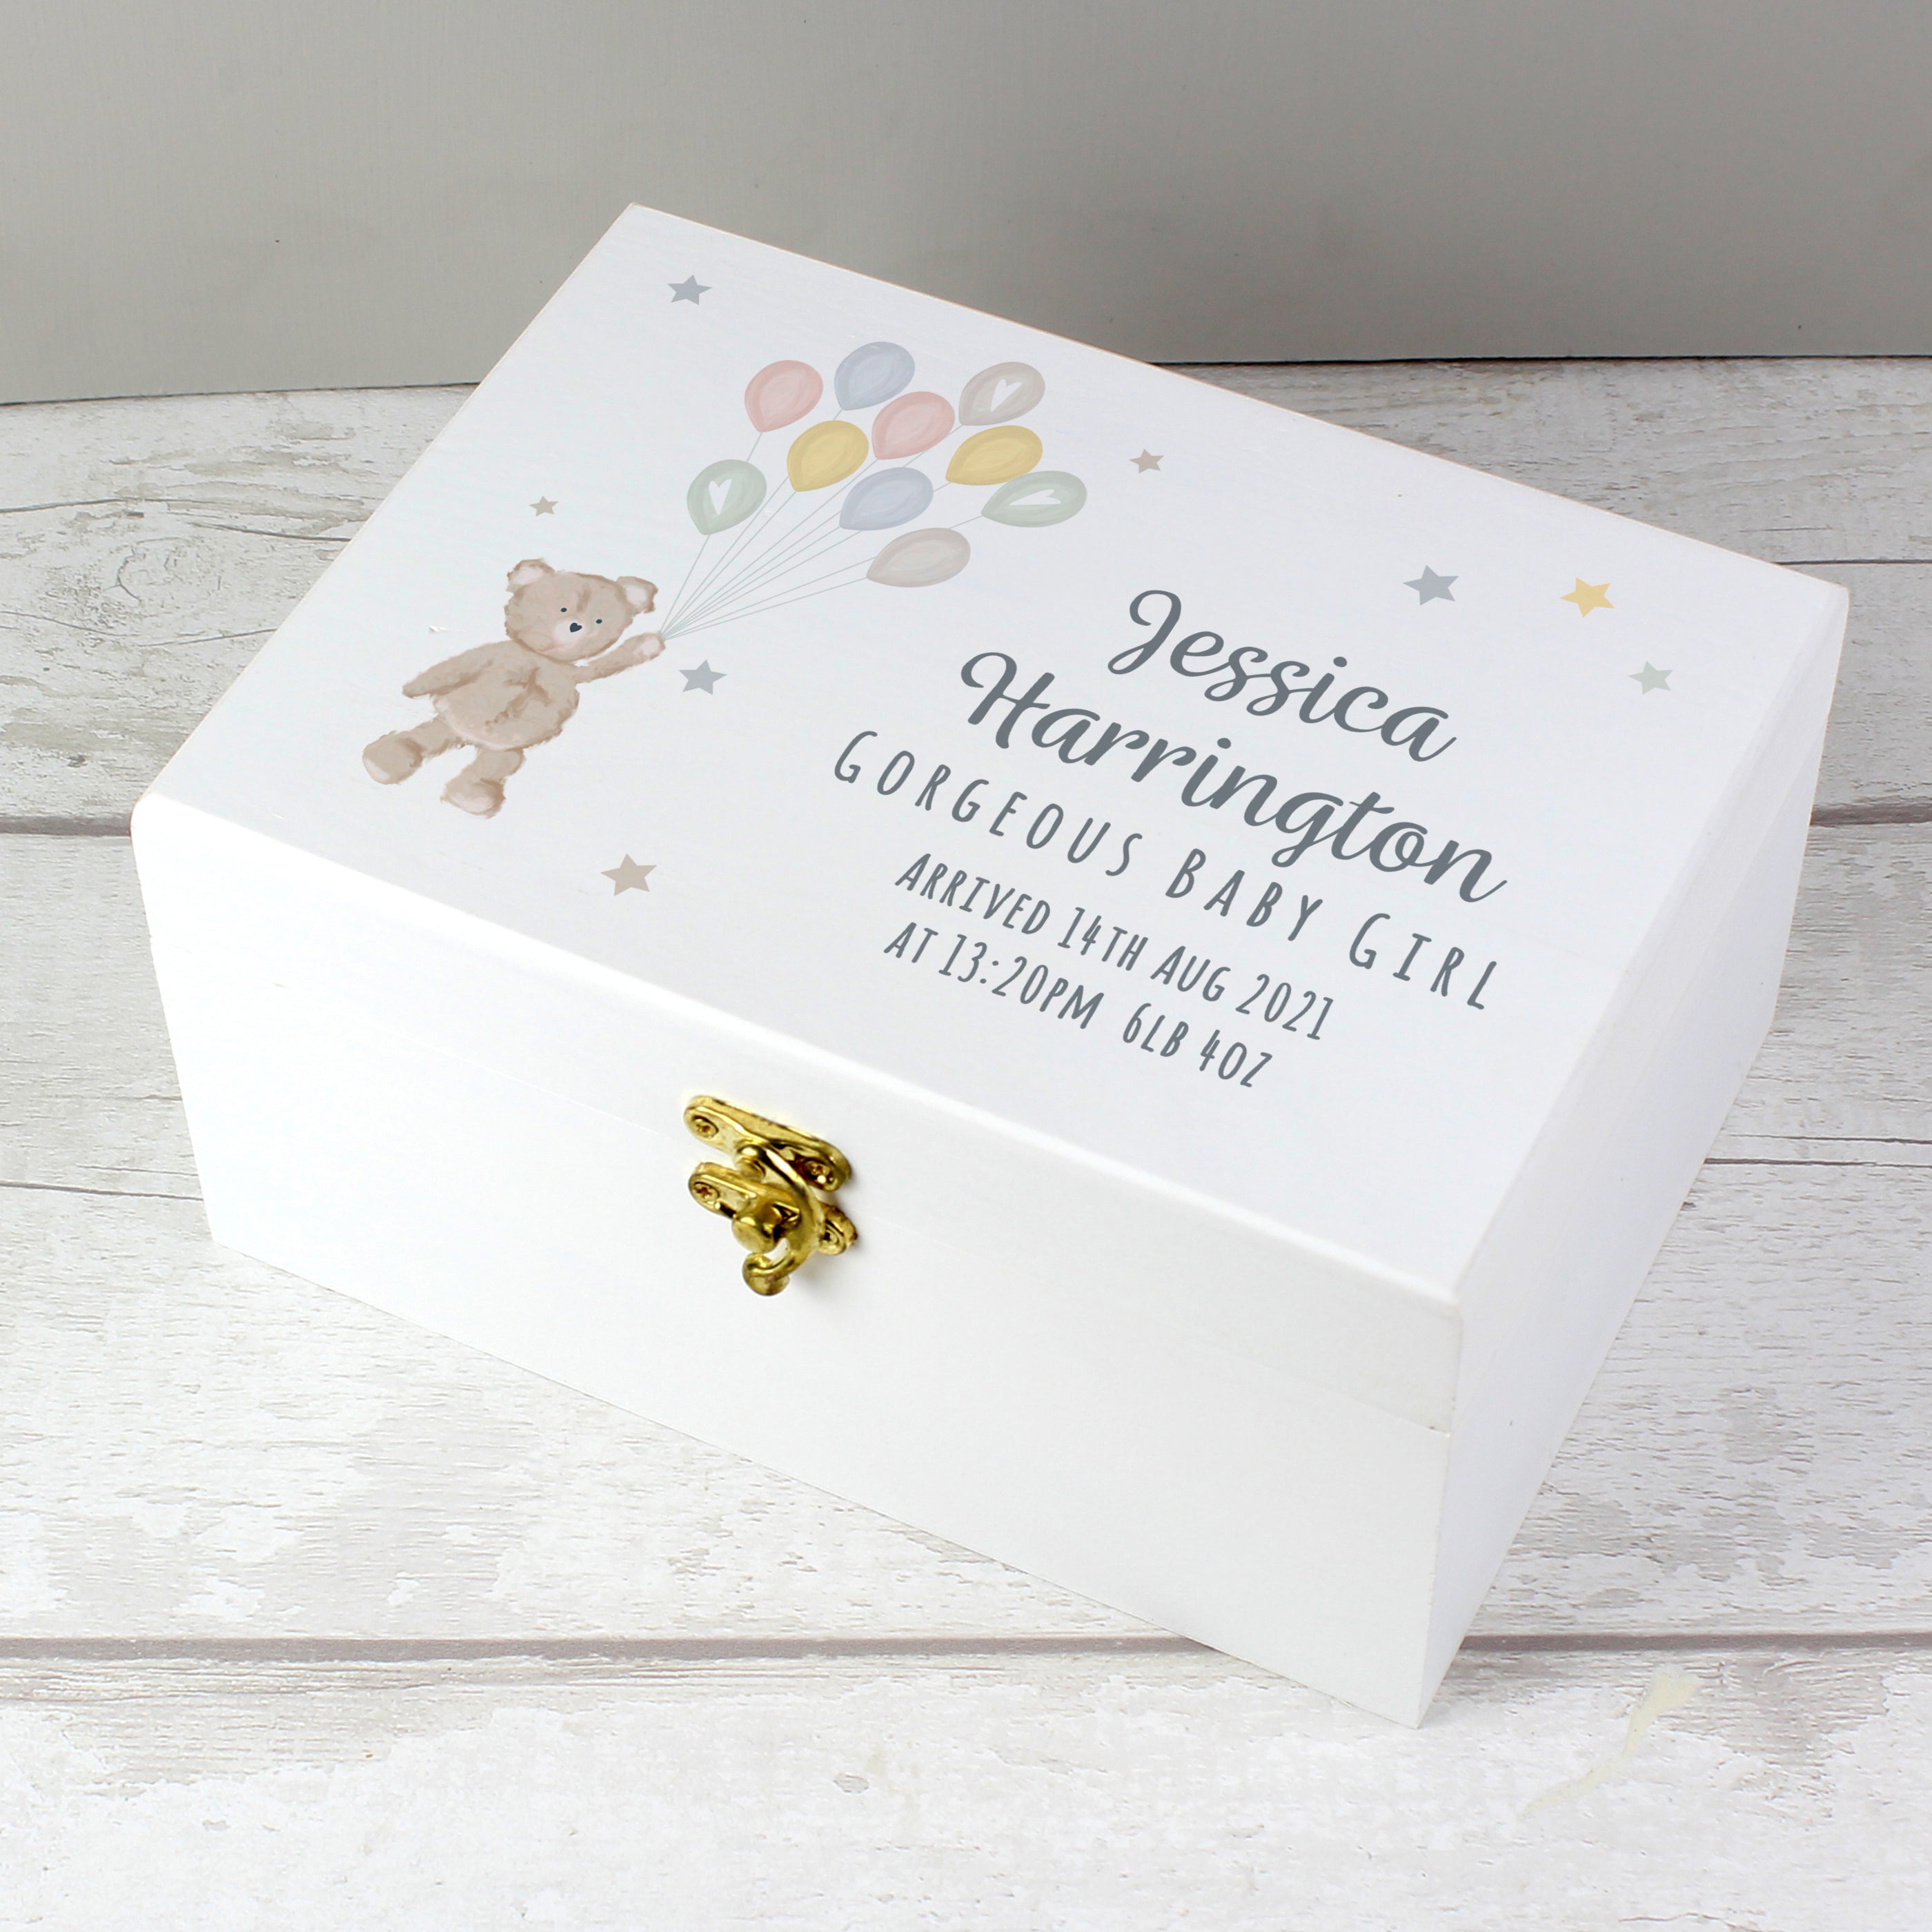 Personalised Couples Names Wedding Gift Keepsake Box By That's Nice That |  Wedding keepsake boxes, Wedding memory box, Keepsake boxes